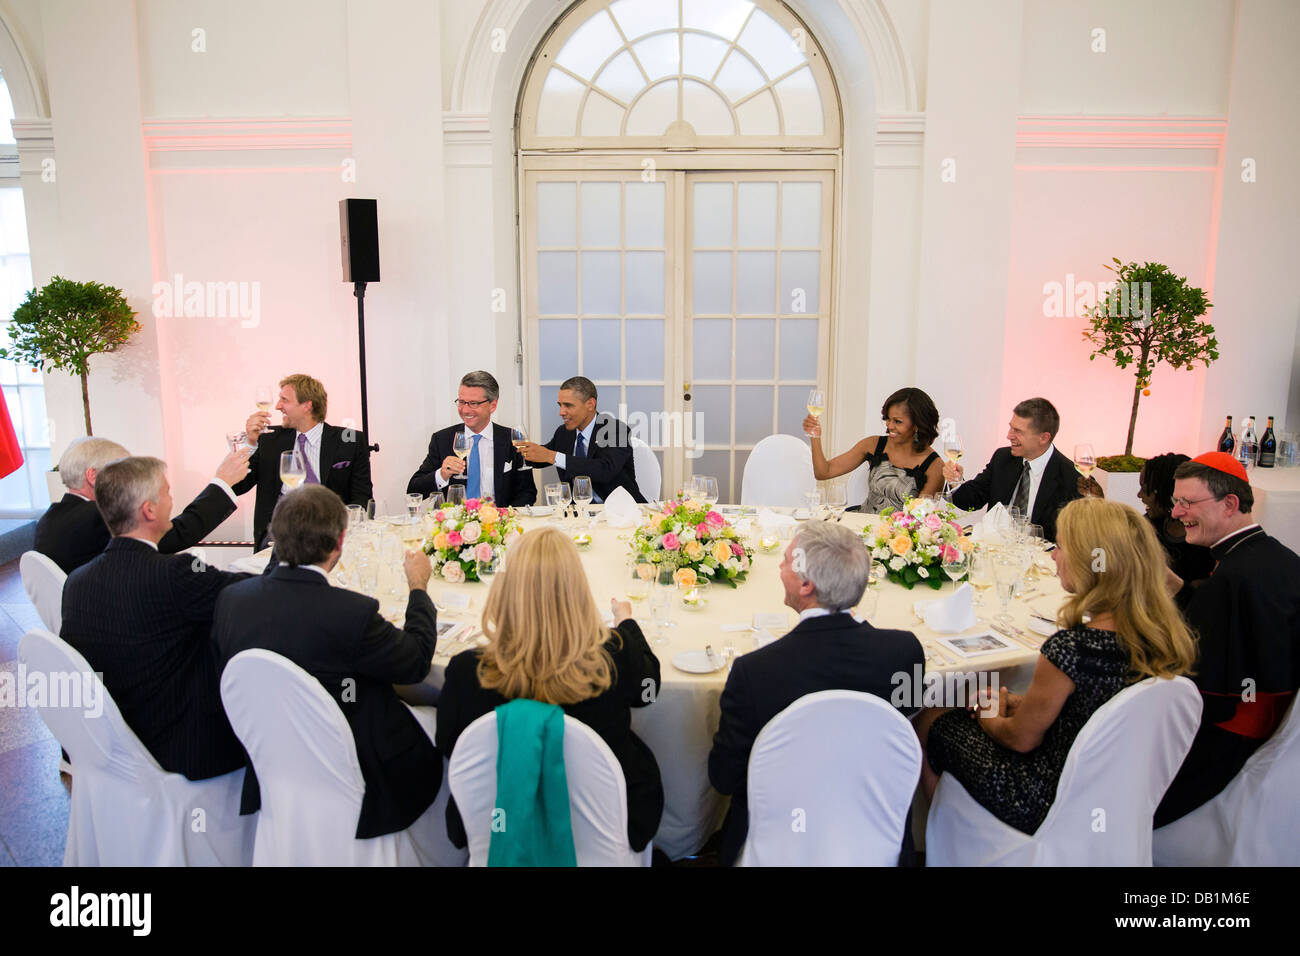 US President Barack Obama and First Lady Michelle Obama raise their glasses in a toast with other guests during a dinner hosted by German Chancellor Angela Merkel at Schloss Charlottenburg June 19, 2013 in Berlin, Germany. Stock Photo